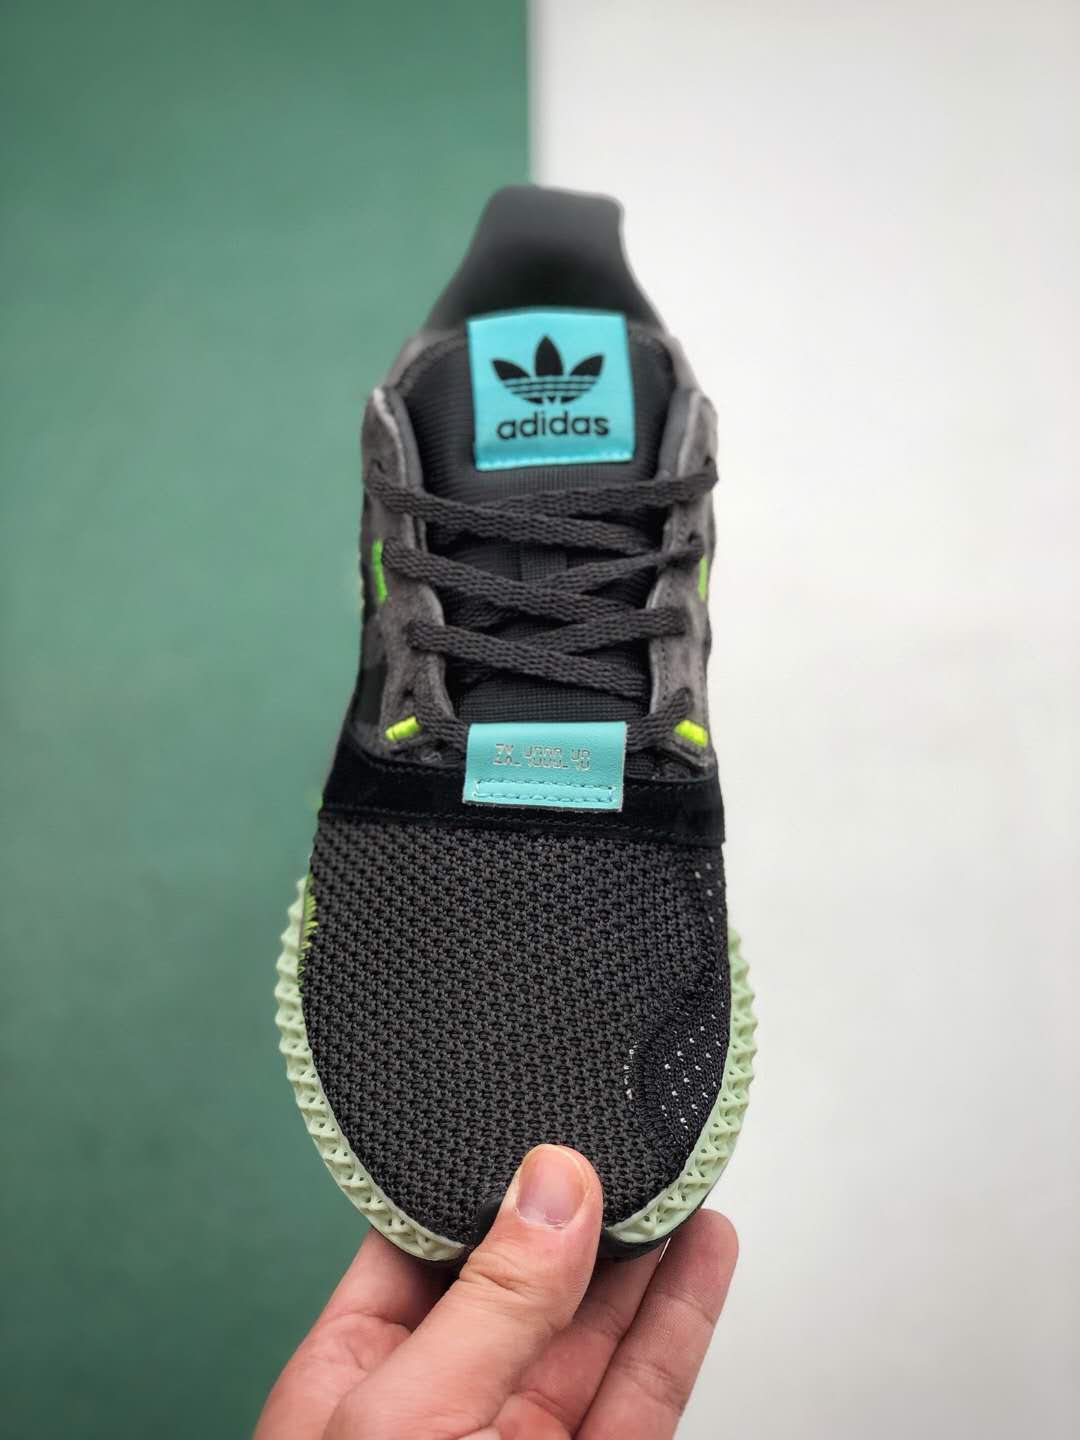 Adidas ZX 4000 Futurecraft 4D Carbon BD7865 - Innovative Comfort and Style